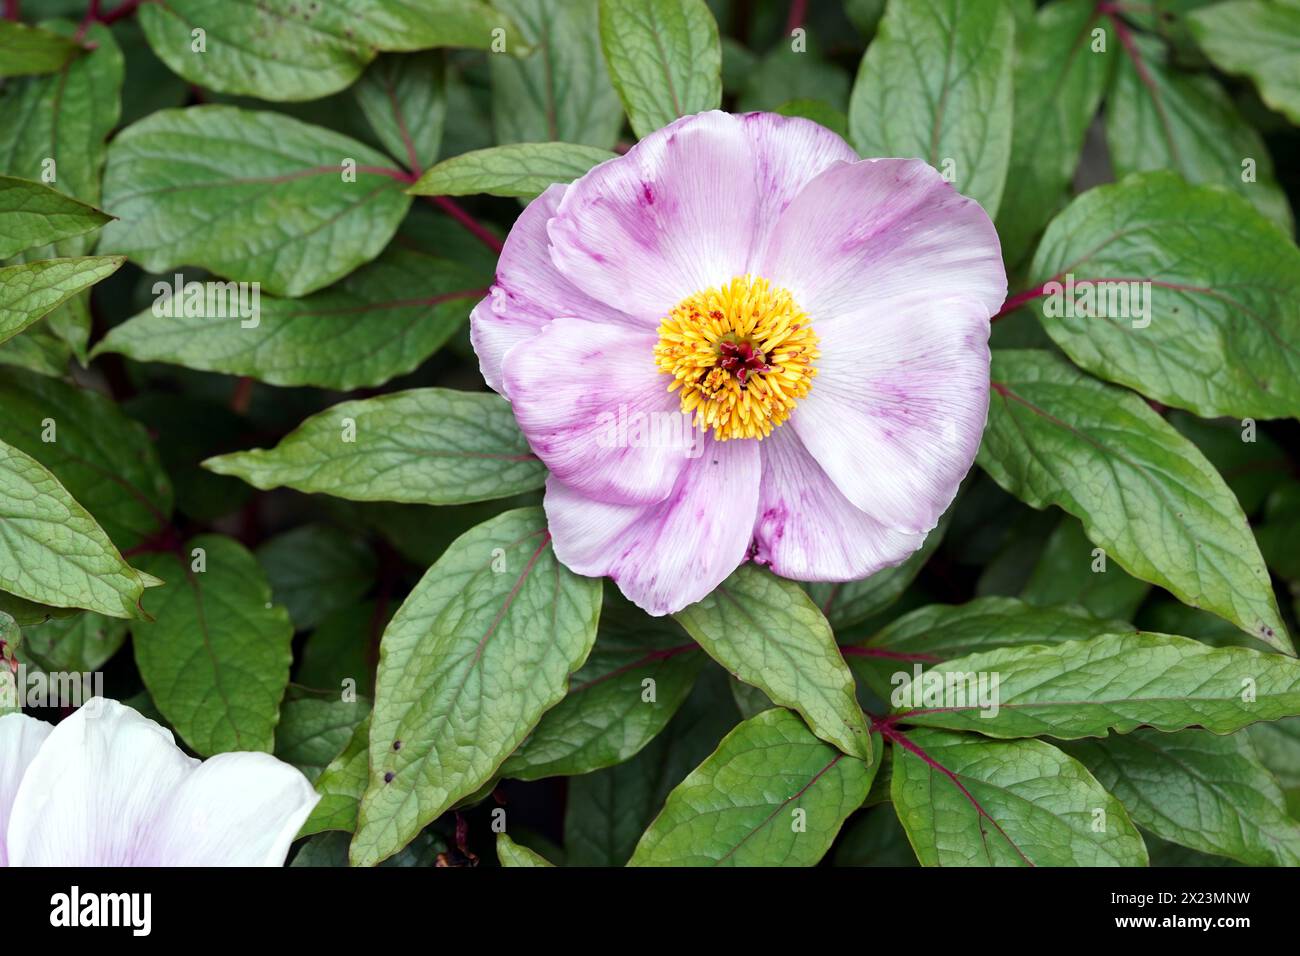 Paeonia cambessedesii is a perennial herbaceous species of peony with pink flowers. Stock Photo